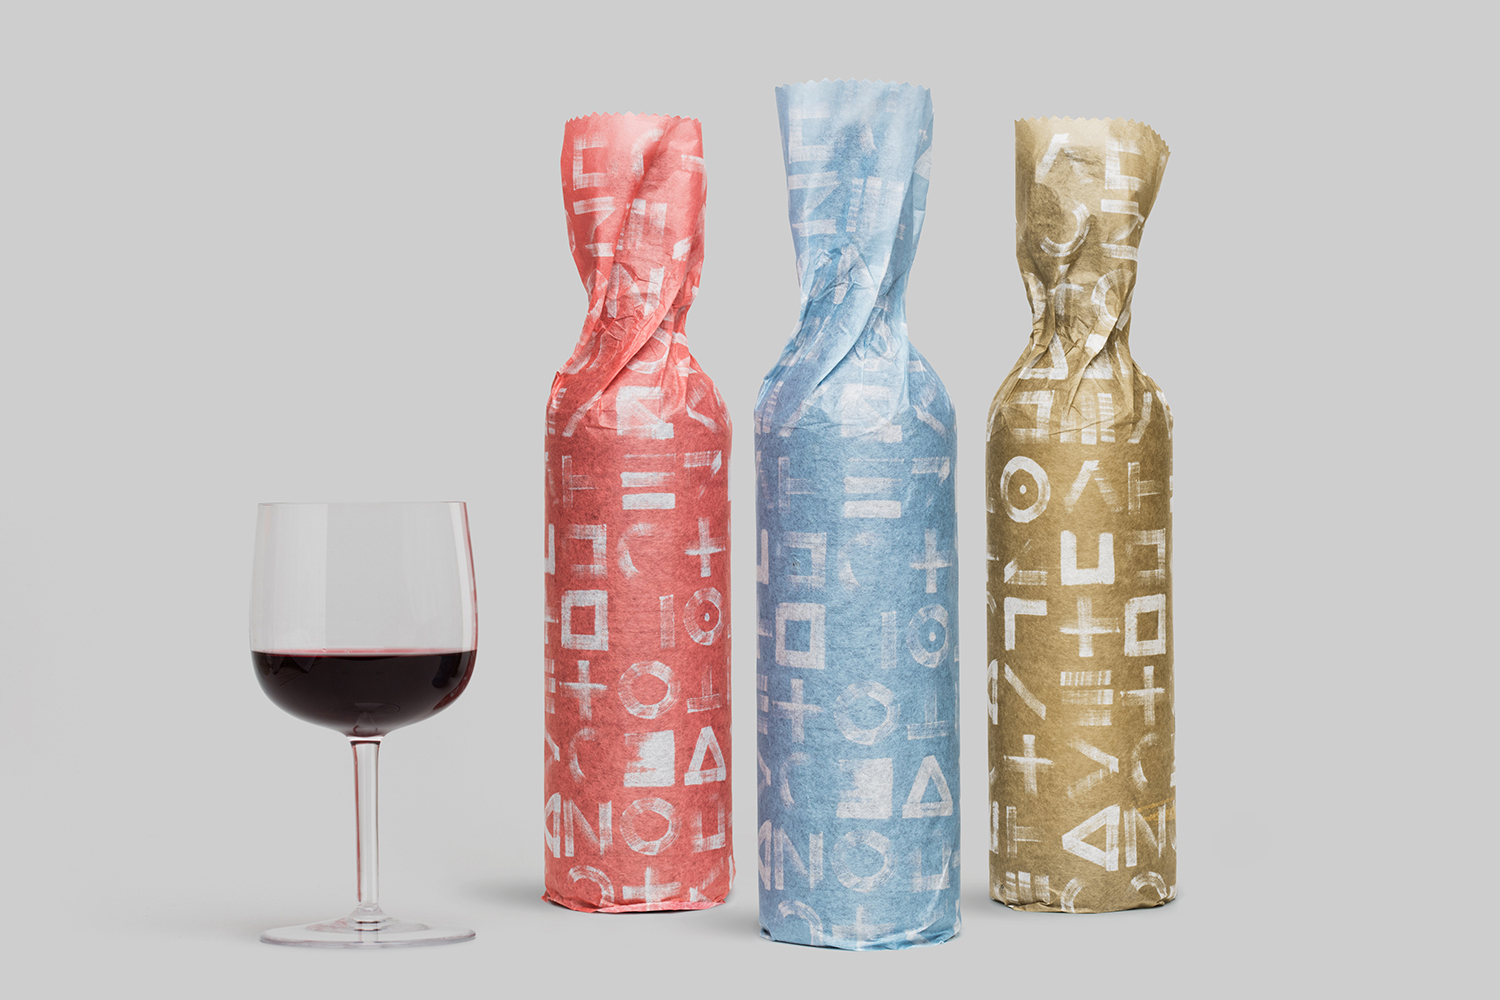 Brand identity and packaging by Mucho for Dutch online wine subscription service Sommos